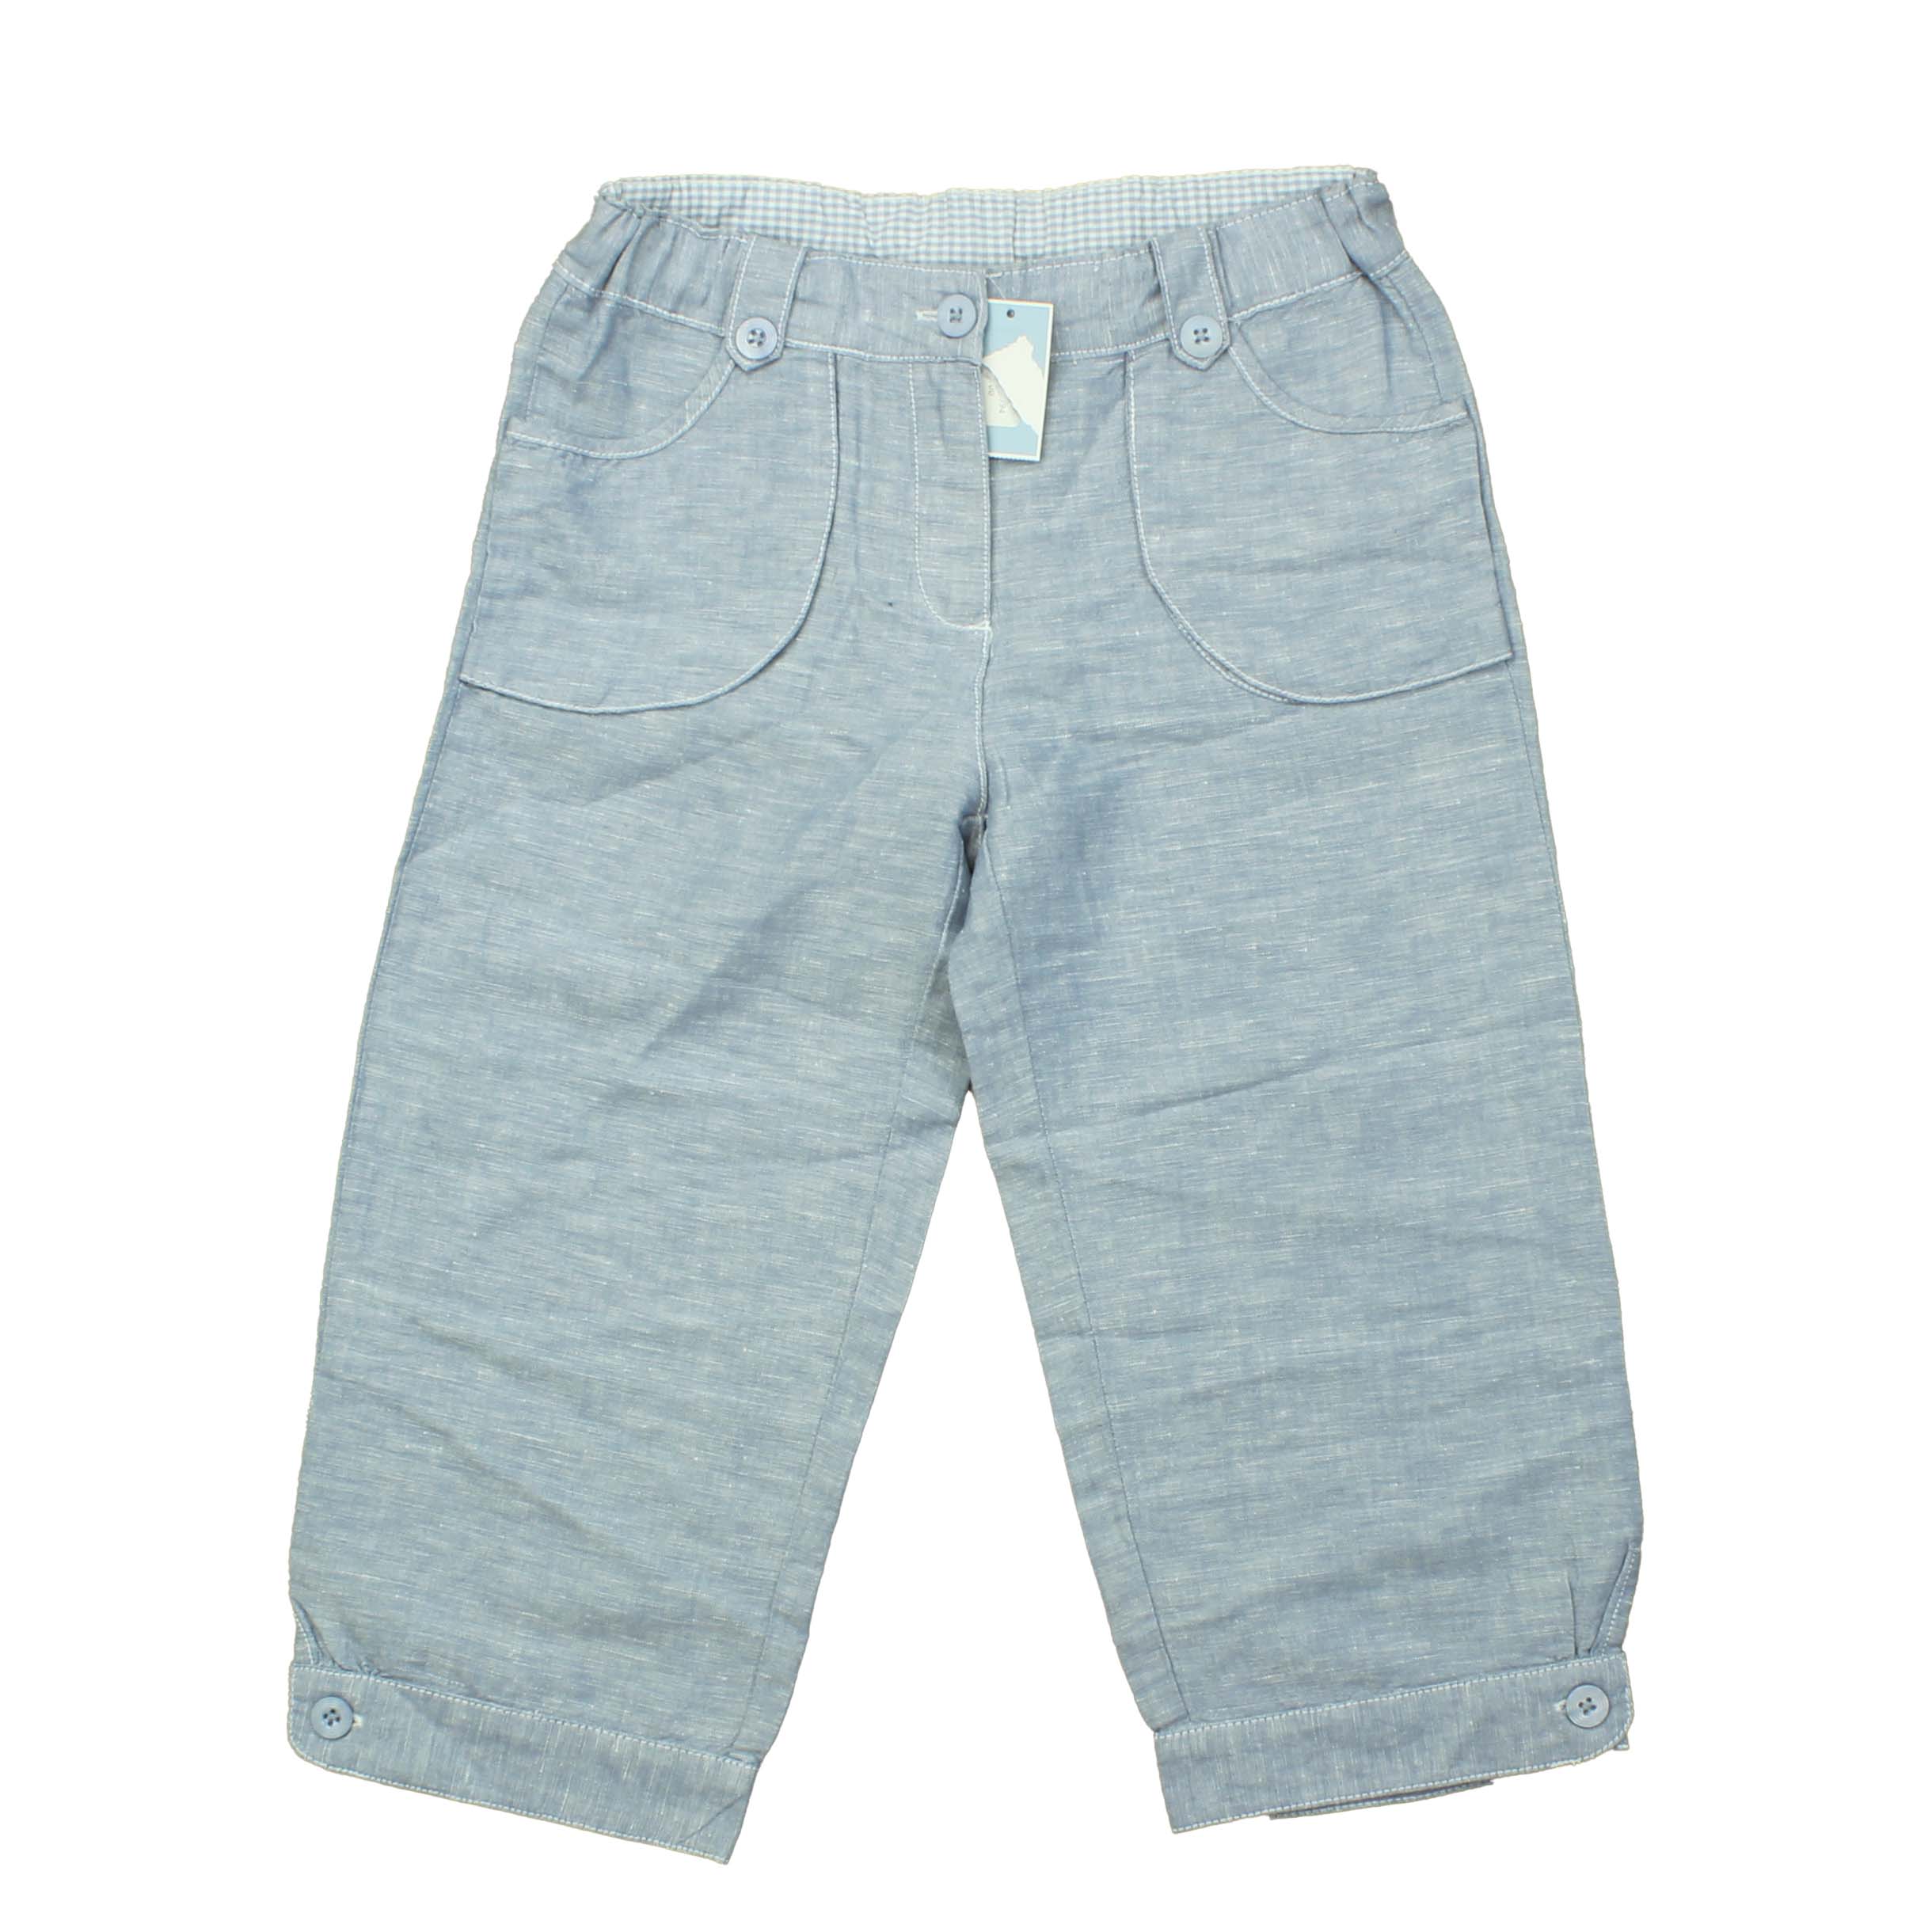 Capri Pants size: 10 Years - The Swoondle Society